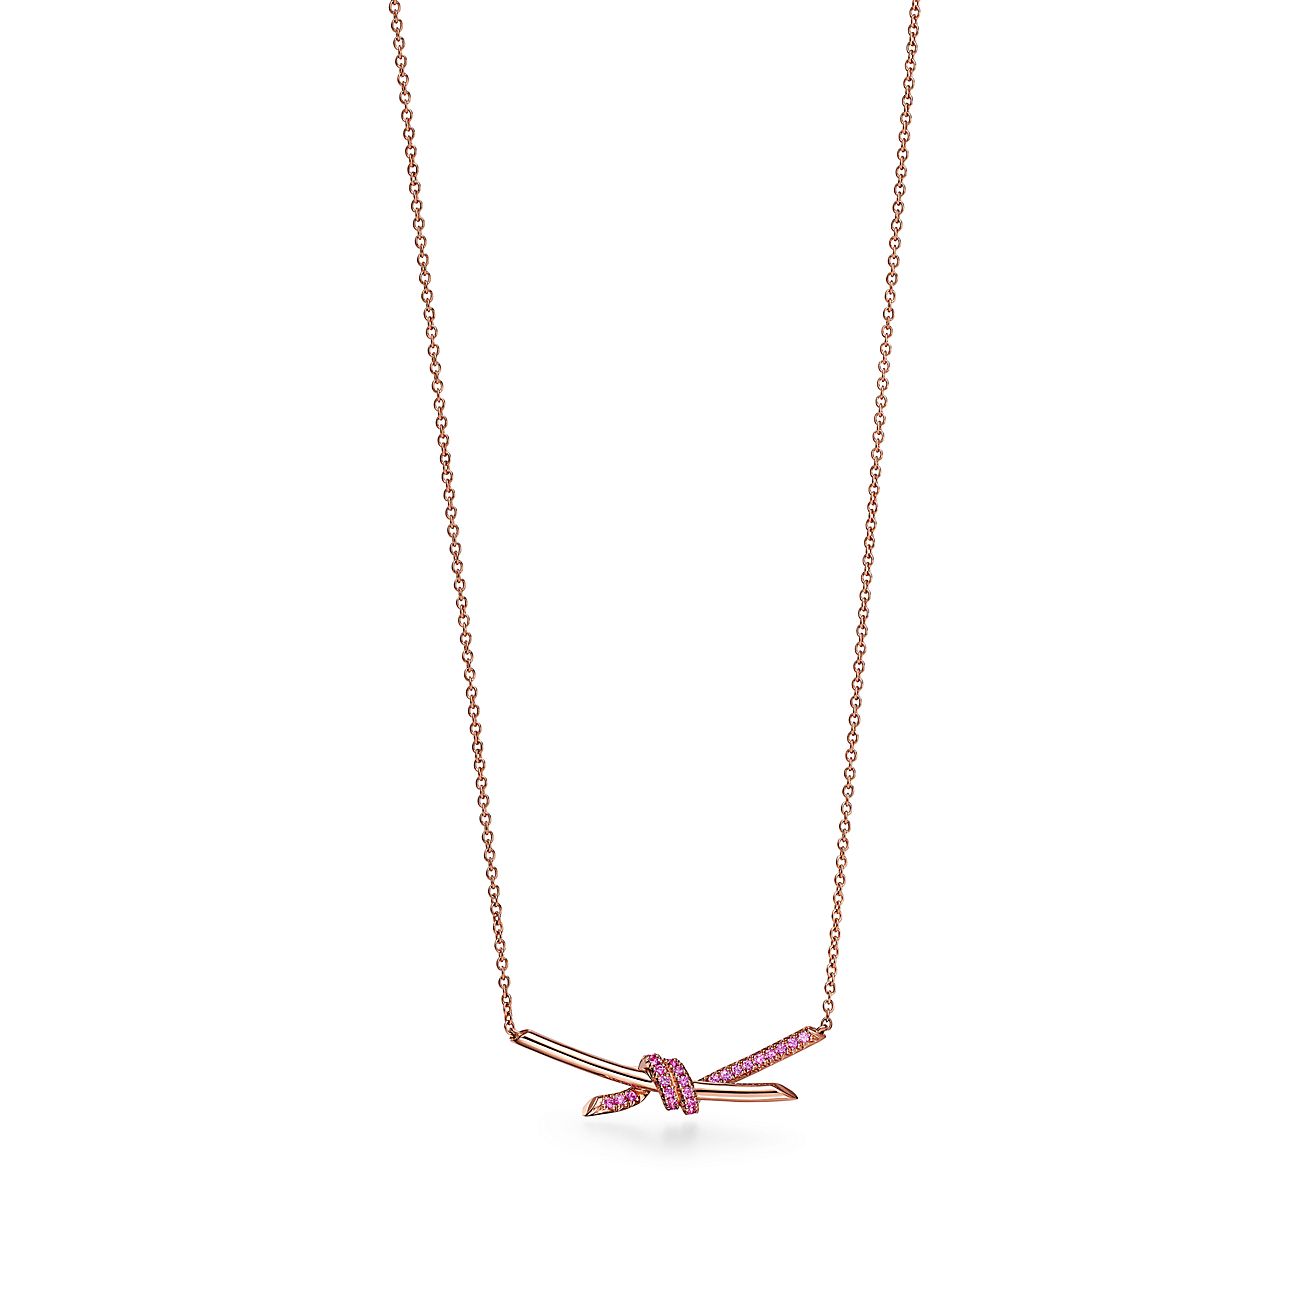 Buy Tiffany & Co Paloma Picasso Graffiti Kiss Necklace With Pink Sapphire  16 Online in India - Etsy